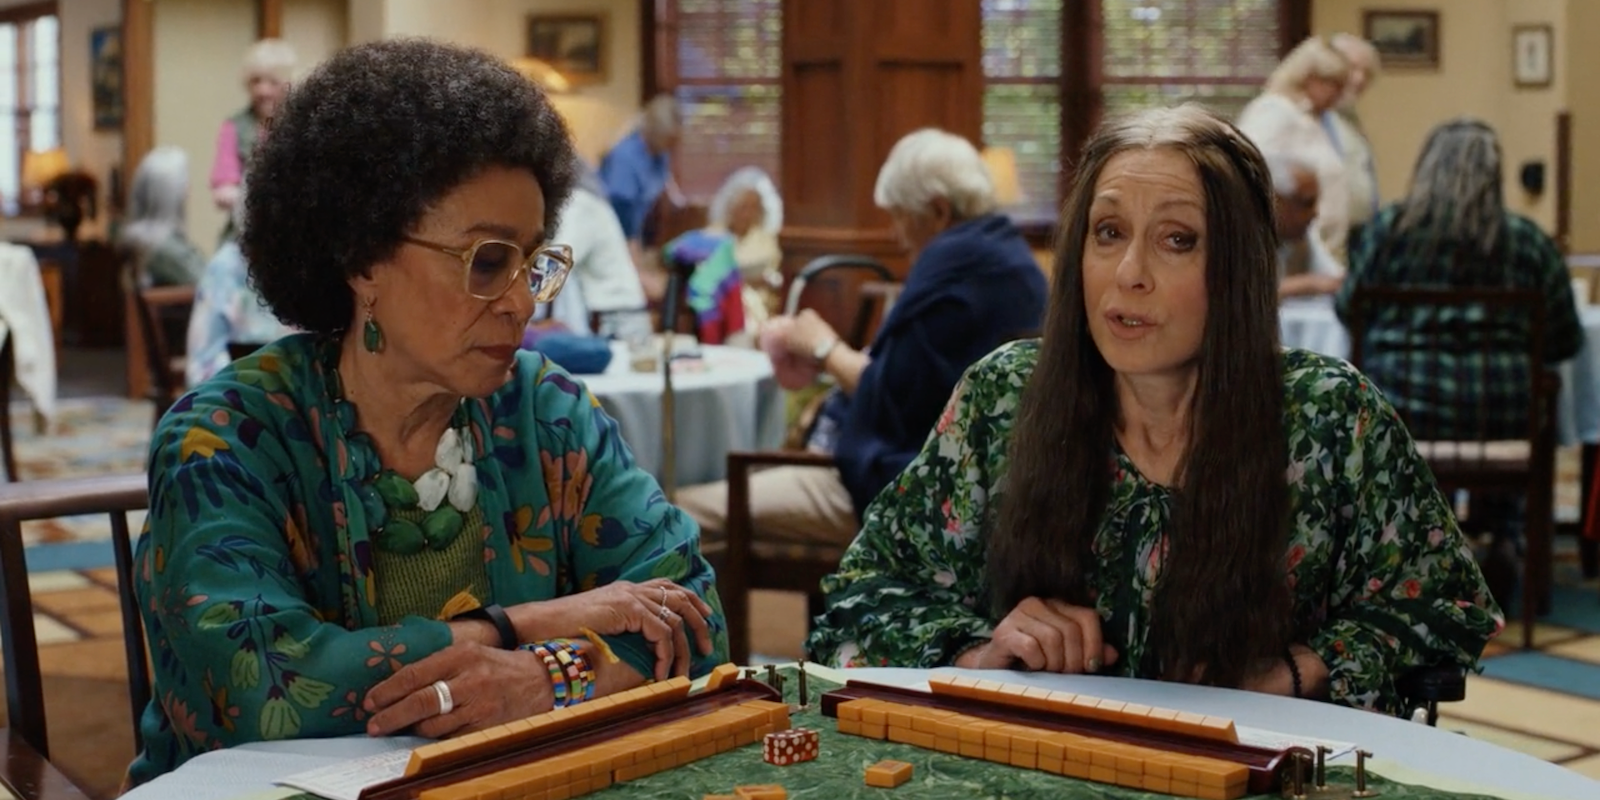 Judith Light and S. Epatha Merkerson playing mahjong in Poker Face